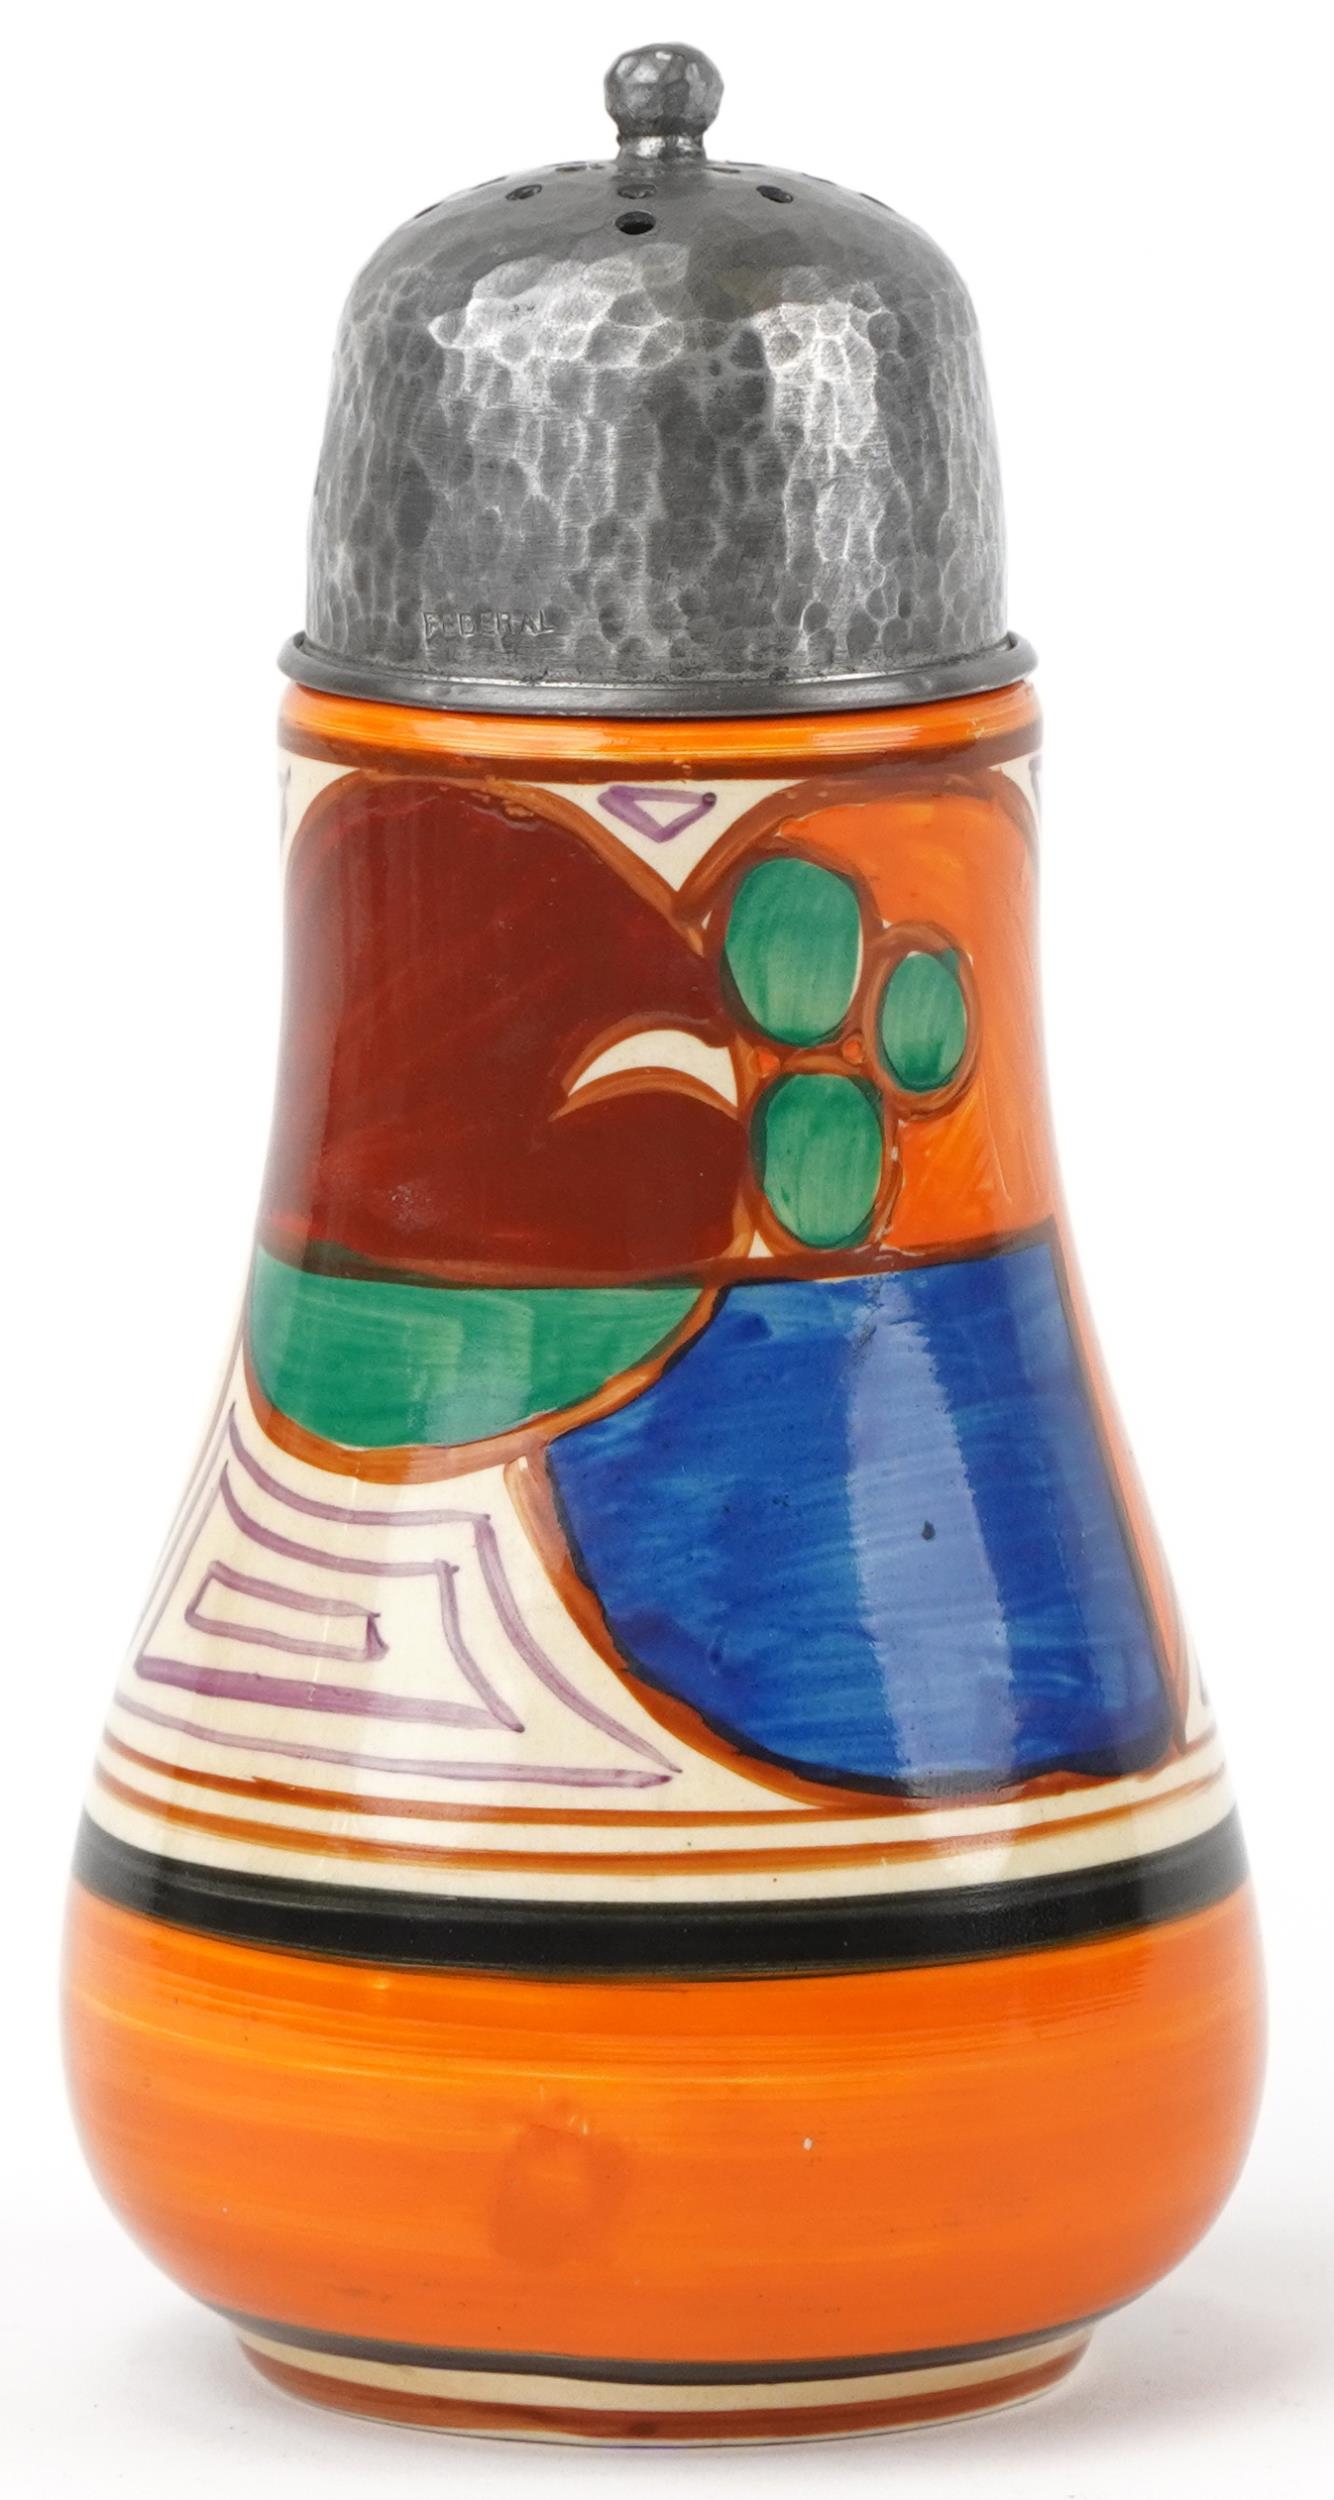 Clarice Cliff, Art Deco Fantastique Bizarre sifter with planished pewter lid hand painted in the - Image 4 of 7